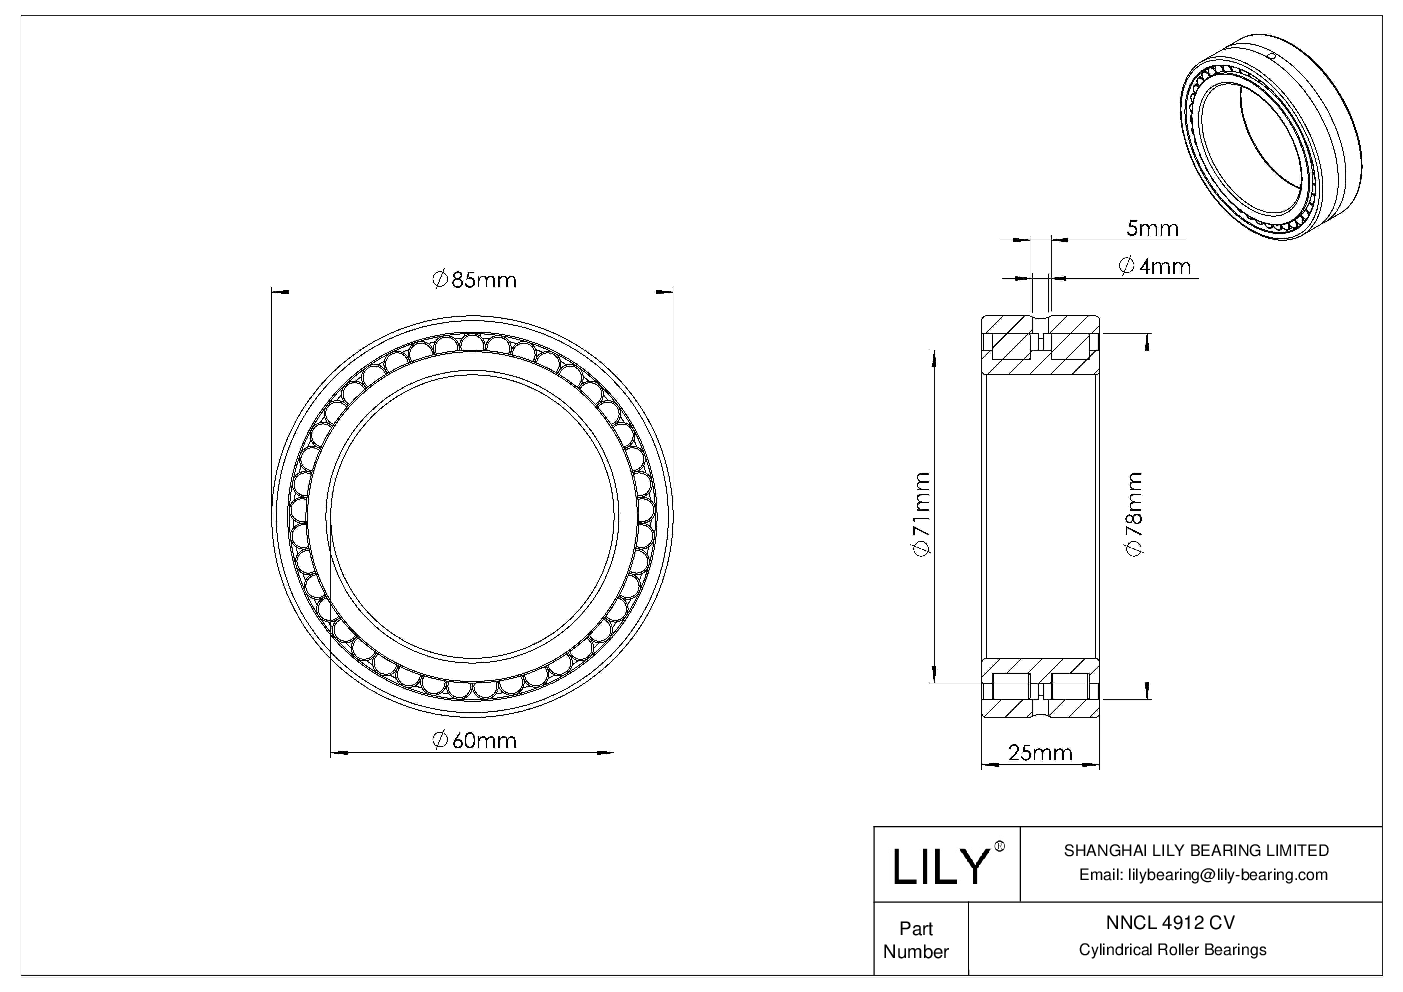 NNCL 4912 CV Double Row Full Complement Cylindrical Roller Bearings cad drawing